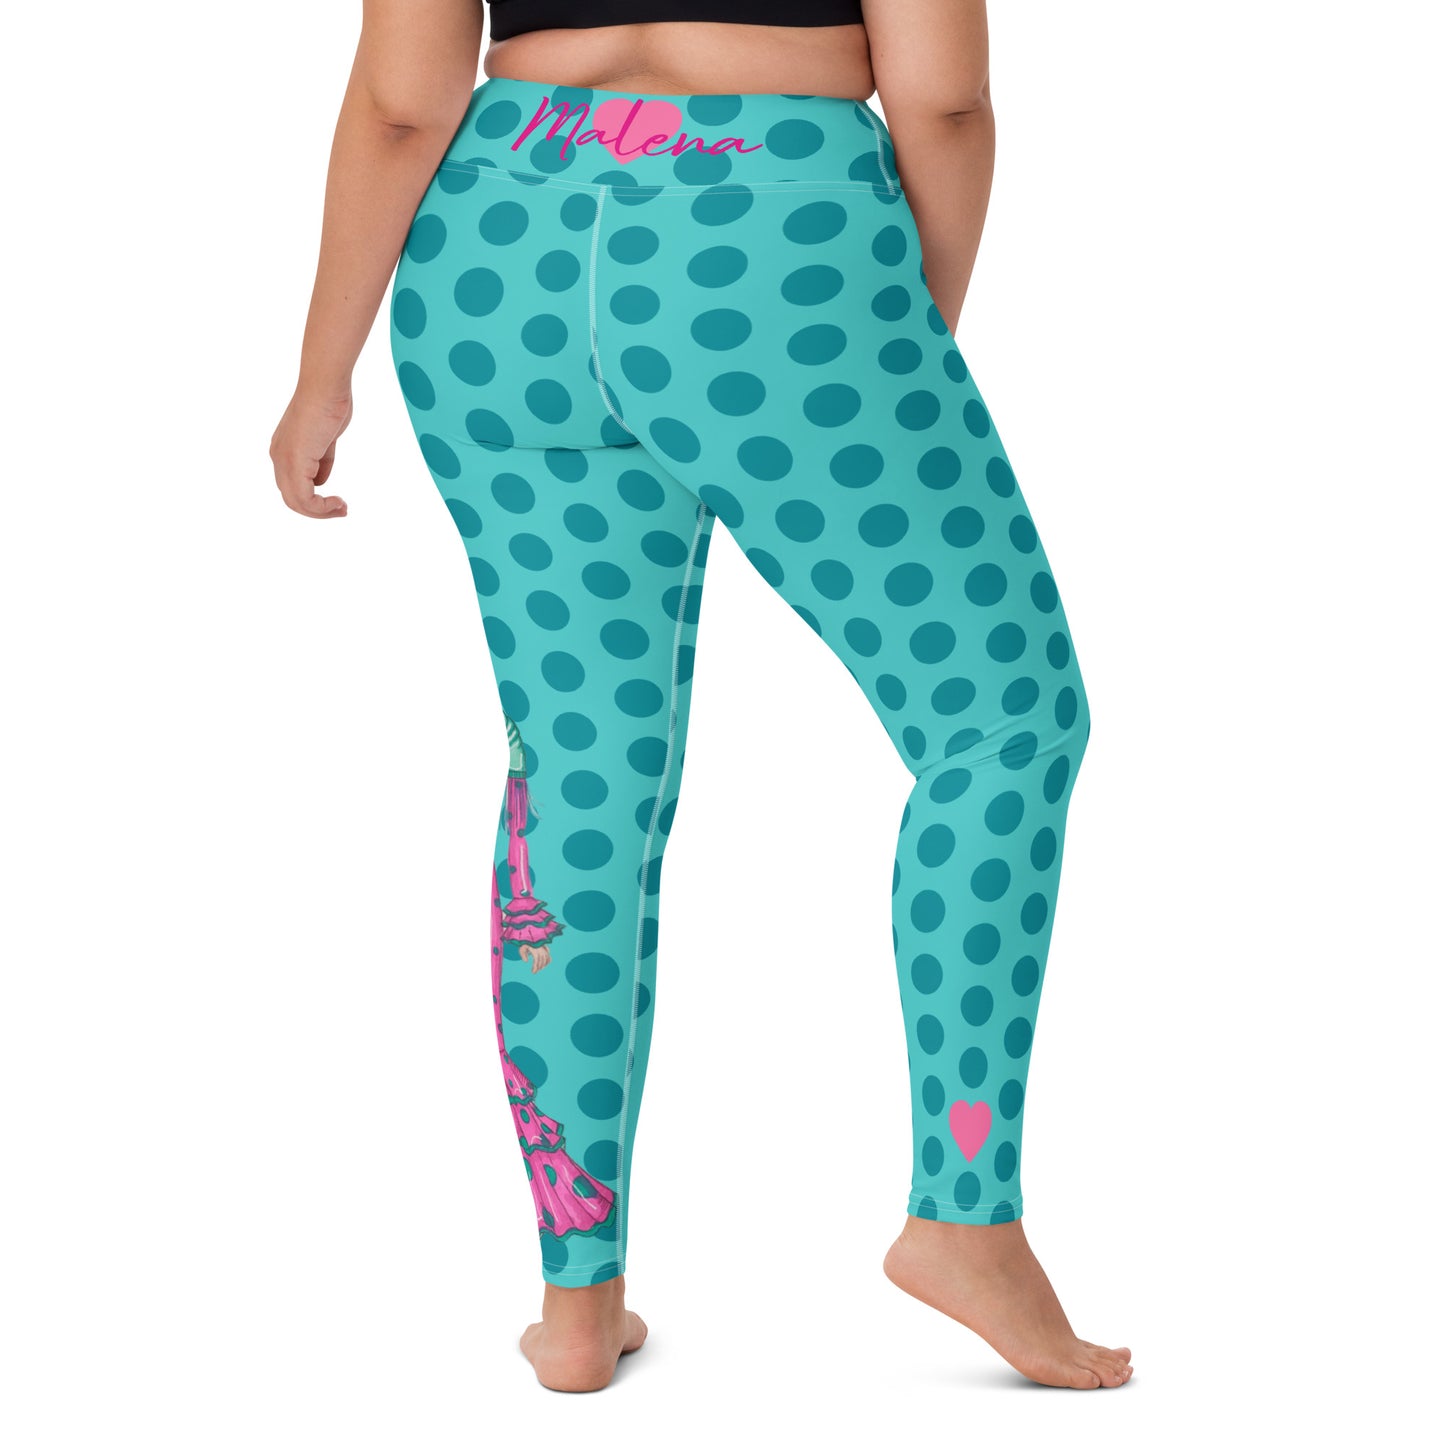 Flamenco Dancer Leggings, turquoise with green polka dots high waisted yoga leggings with a pink dress and green shawl - IllustrArte